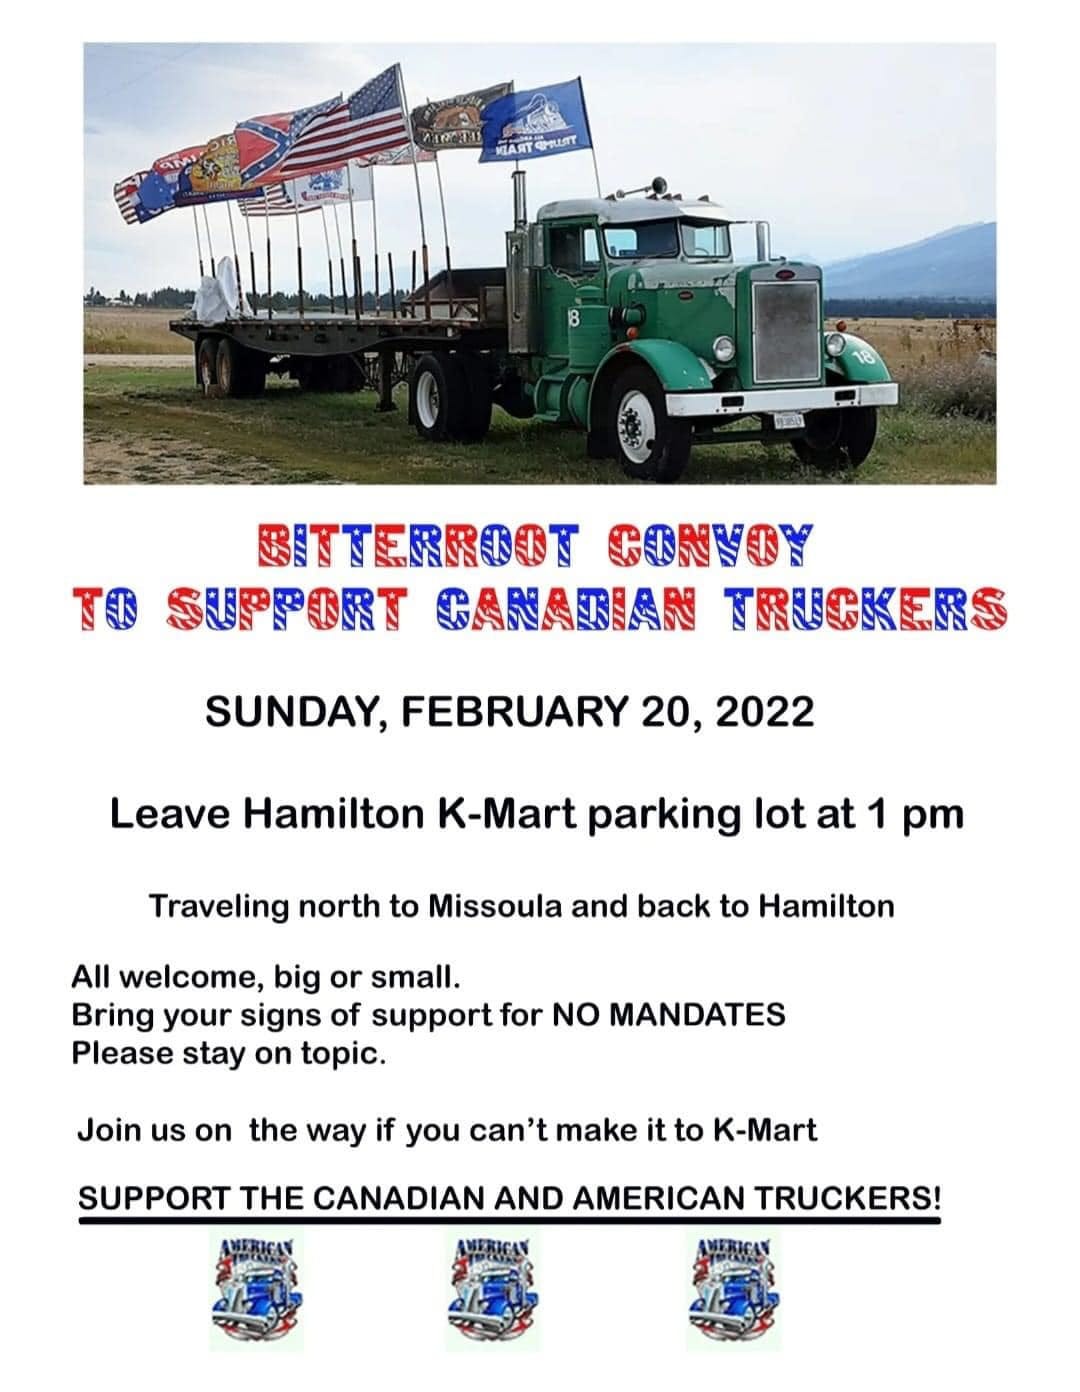 May be an image of outdoors and text that says 'KLART GMயLTT SITTERROOT CONVOY TO SUPFORT CANADIAN TRUCKERS SUNDAY, FEBRUARY 20, 2022 Leave Hamilton K-Mart parking lot at 1 pm Traveling north to Missoula and back to Hamilton All welcome, big or small. Bring your signs of support for NO MANDATES Please stay on topic. Join us on the way if you can't make it to K-Mart SUPPORT THE CANADIAN AND AMERICAN TRUCKERS!'